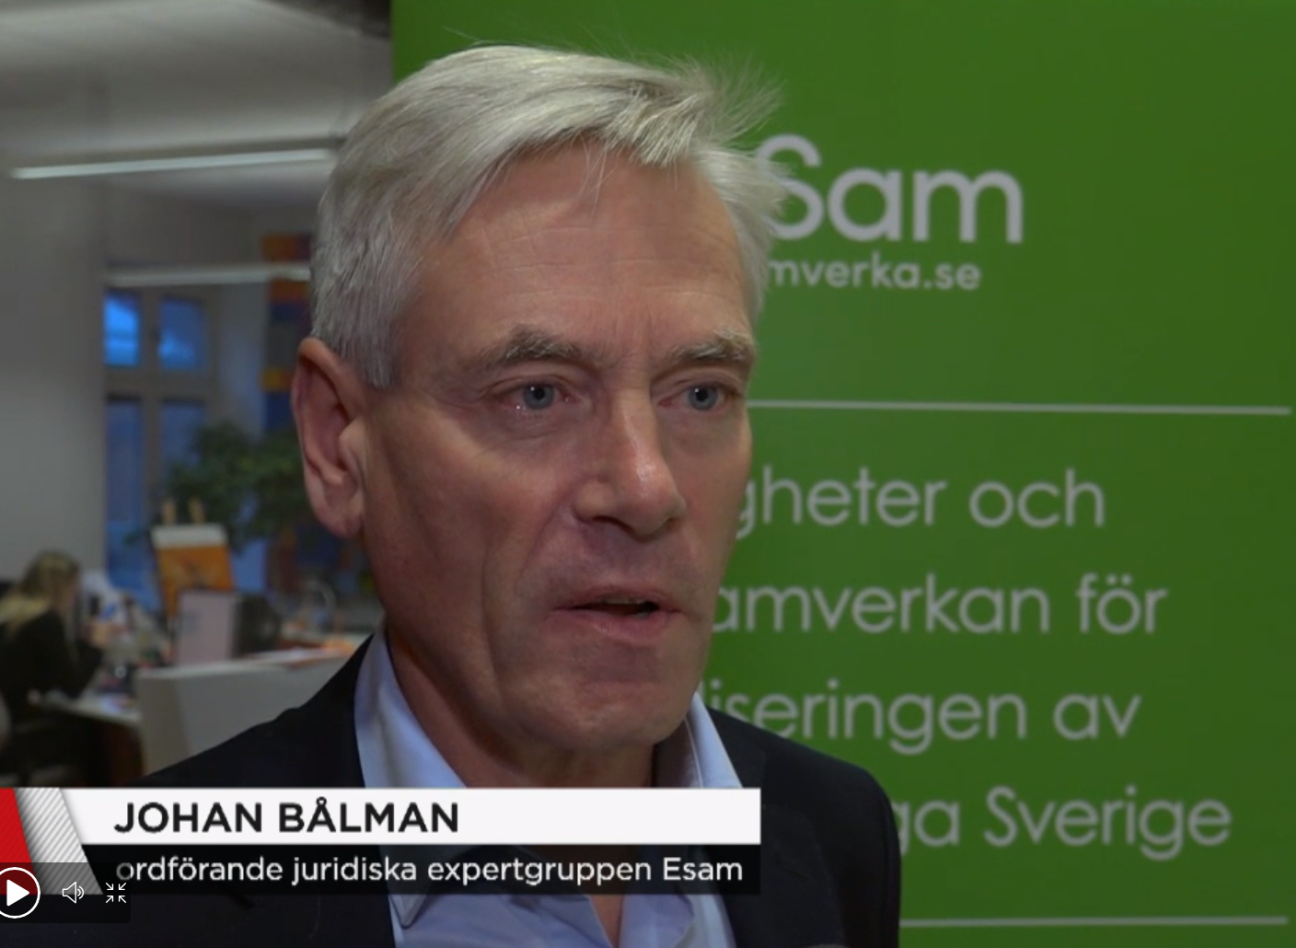 The image shows Johan Bålman, head of the eSam legal expert group, interviewed by Sweden's TV4